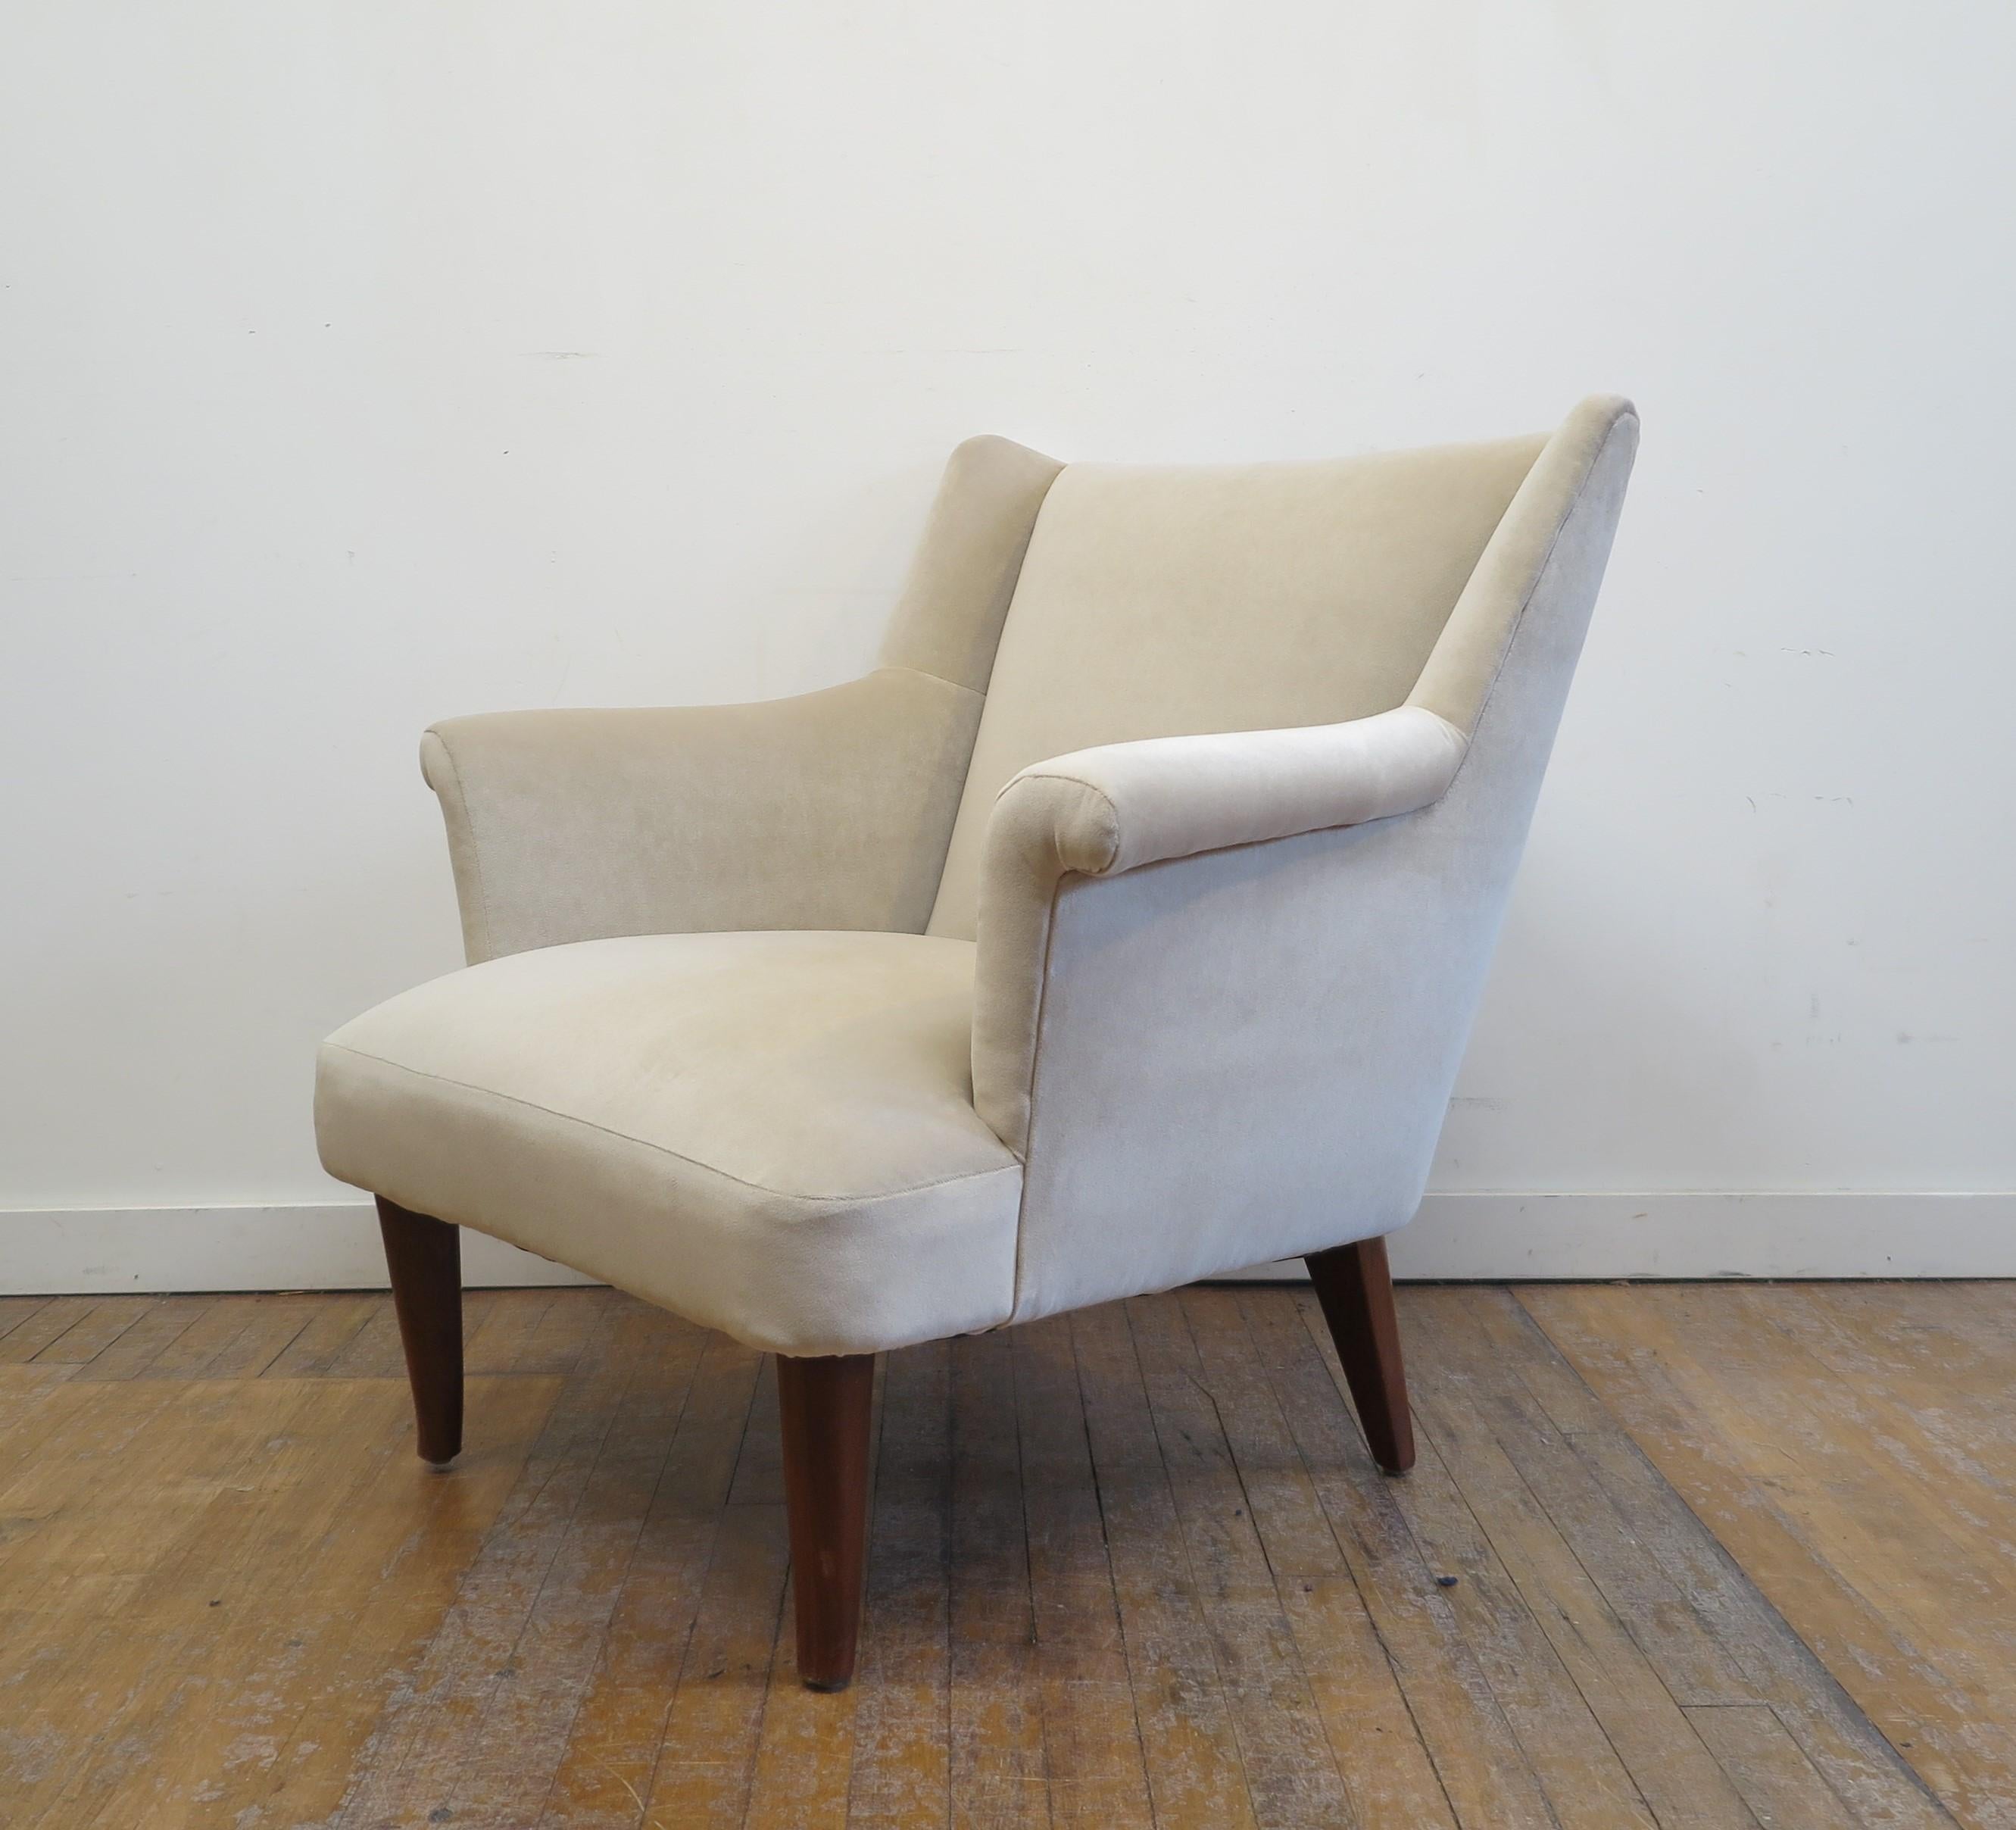 Mid-20th Century Edward Wormley Lounge Chair #4796 for Dunbar For Sale